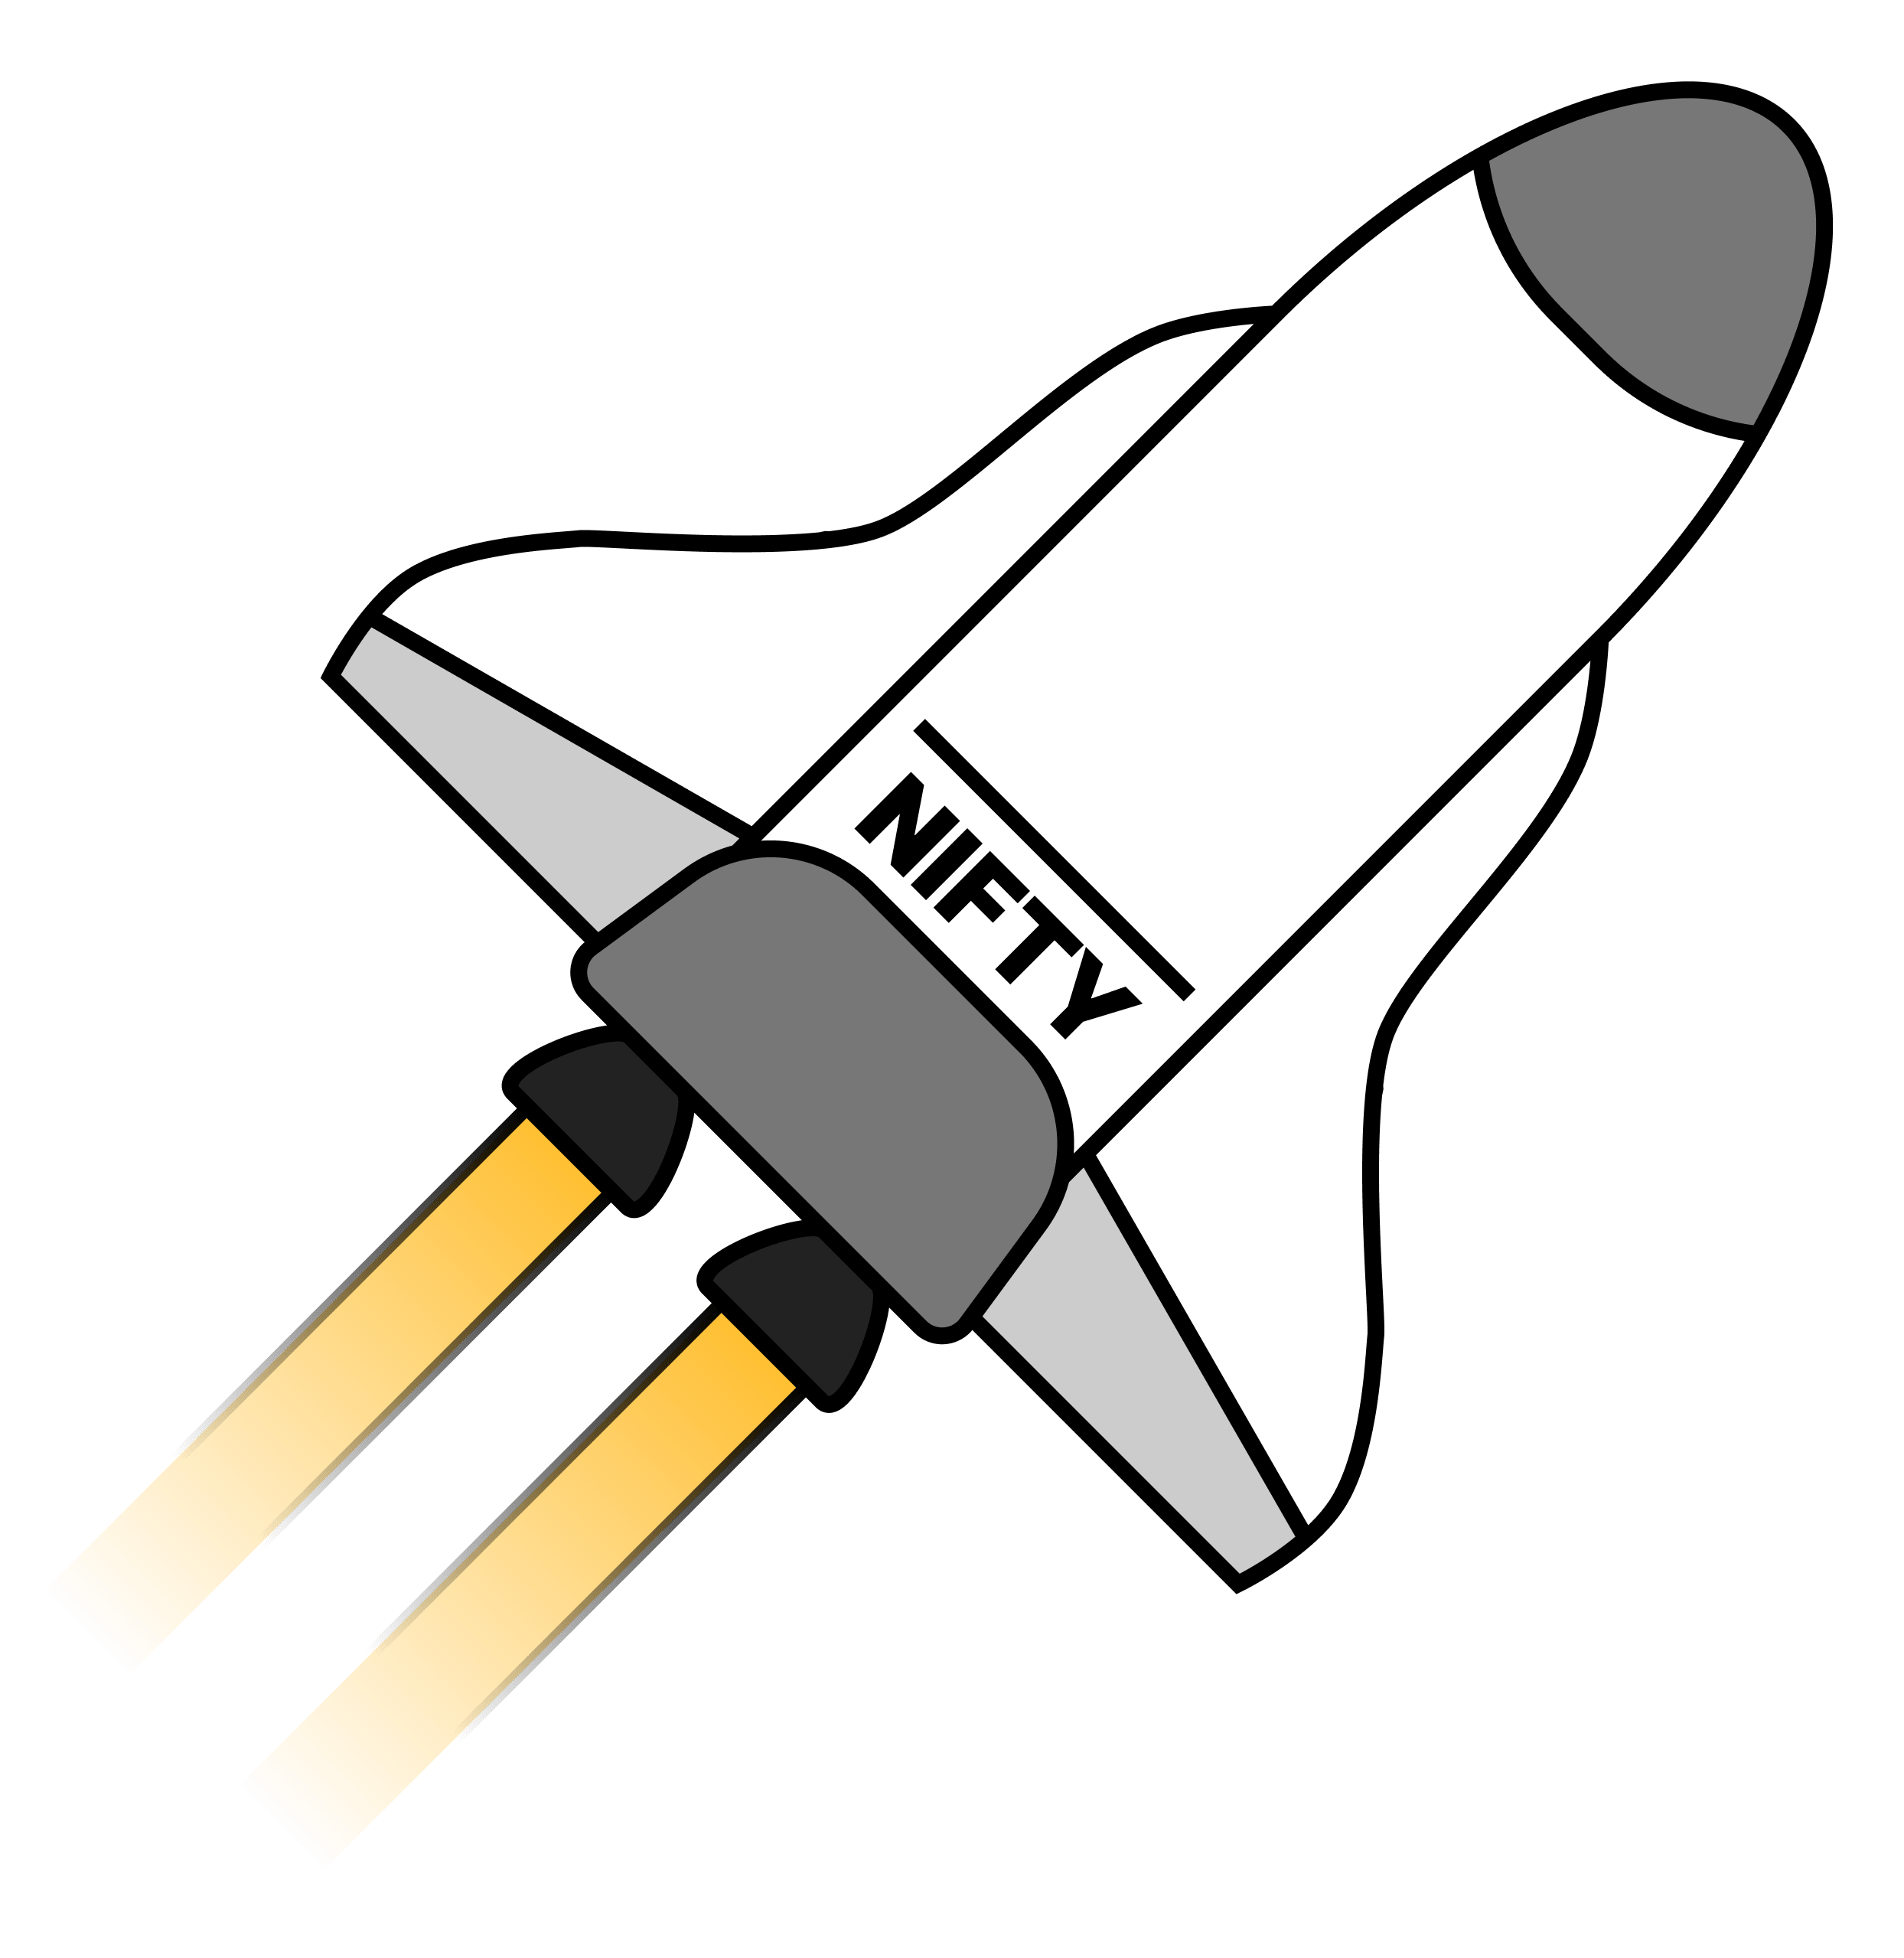 An illustration of a rocket ship taking off